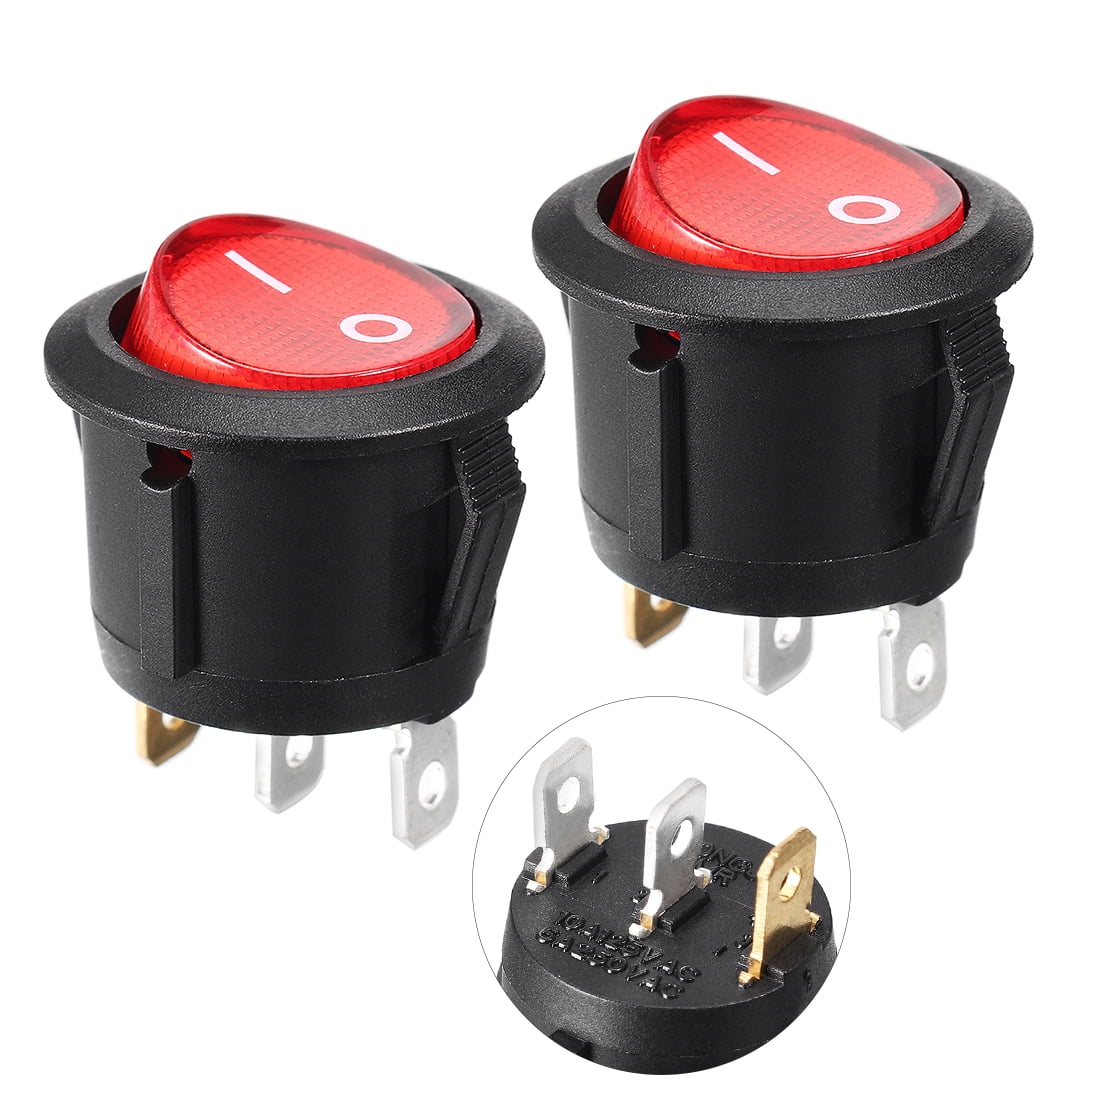 RuiLing 2PCS Snap Round Rocker Power Switch 6A 250V AC 3 Pin SPST Snap-in ON/Off Power Switch Red Button with Light